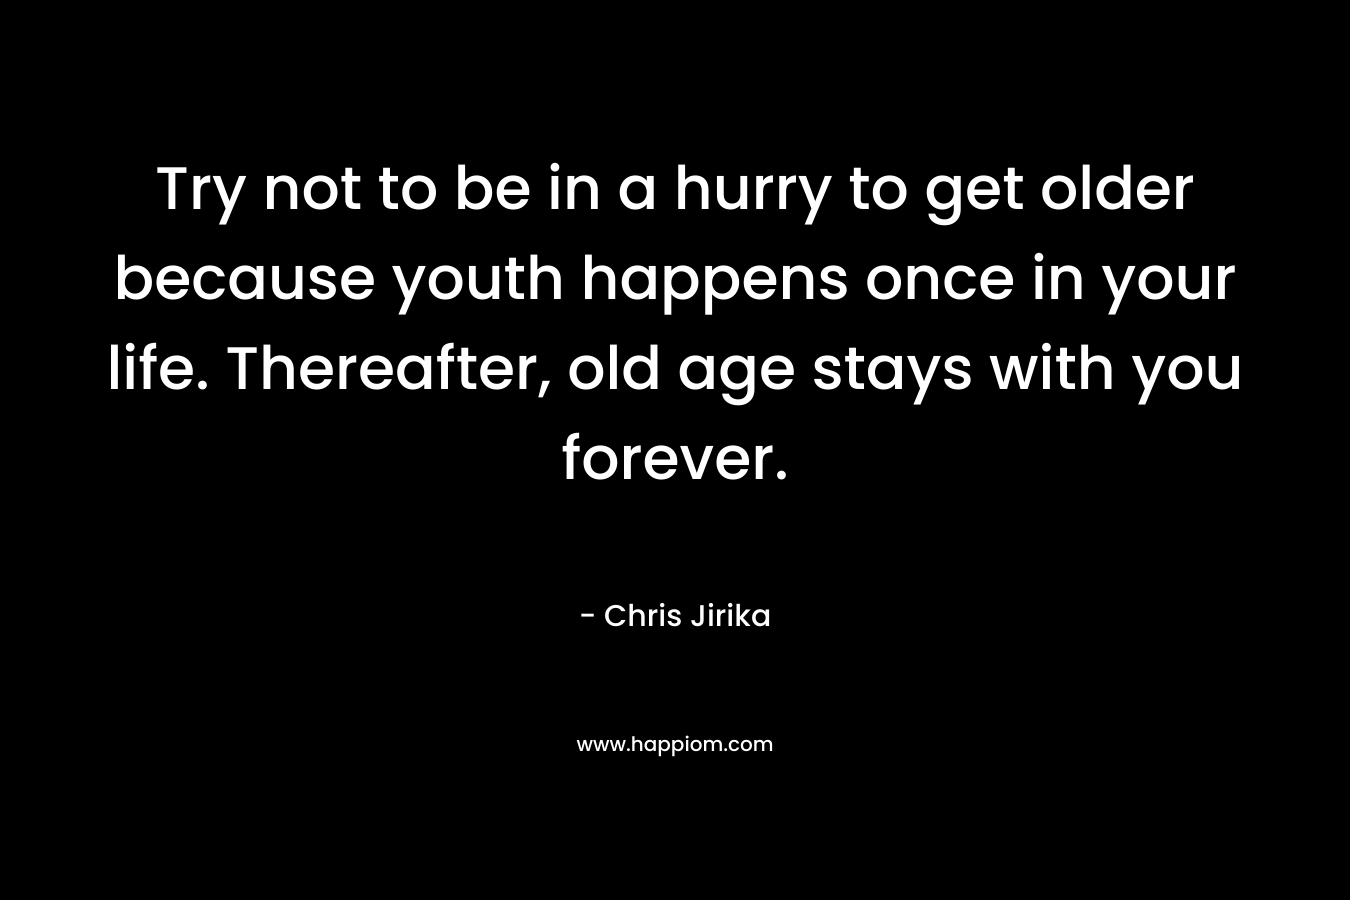 Try not to be in a hurry to get older because youth happens once in your life. Thereafter, old age stays with you forever. – Chris Jirika